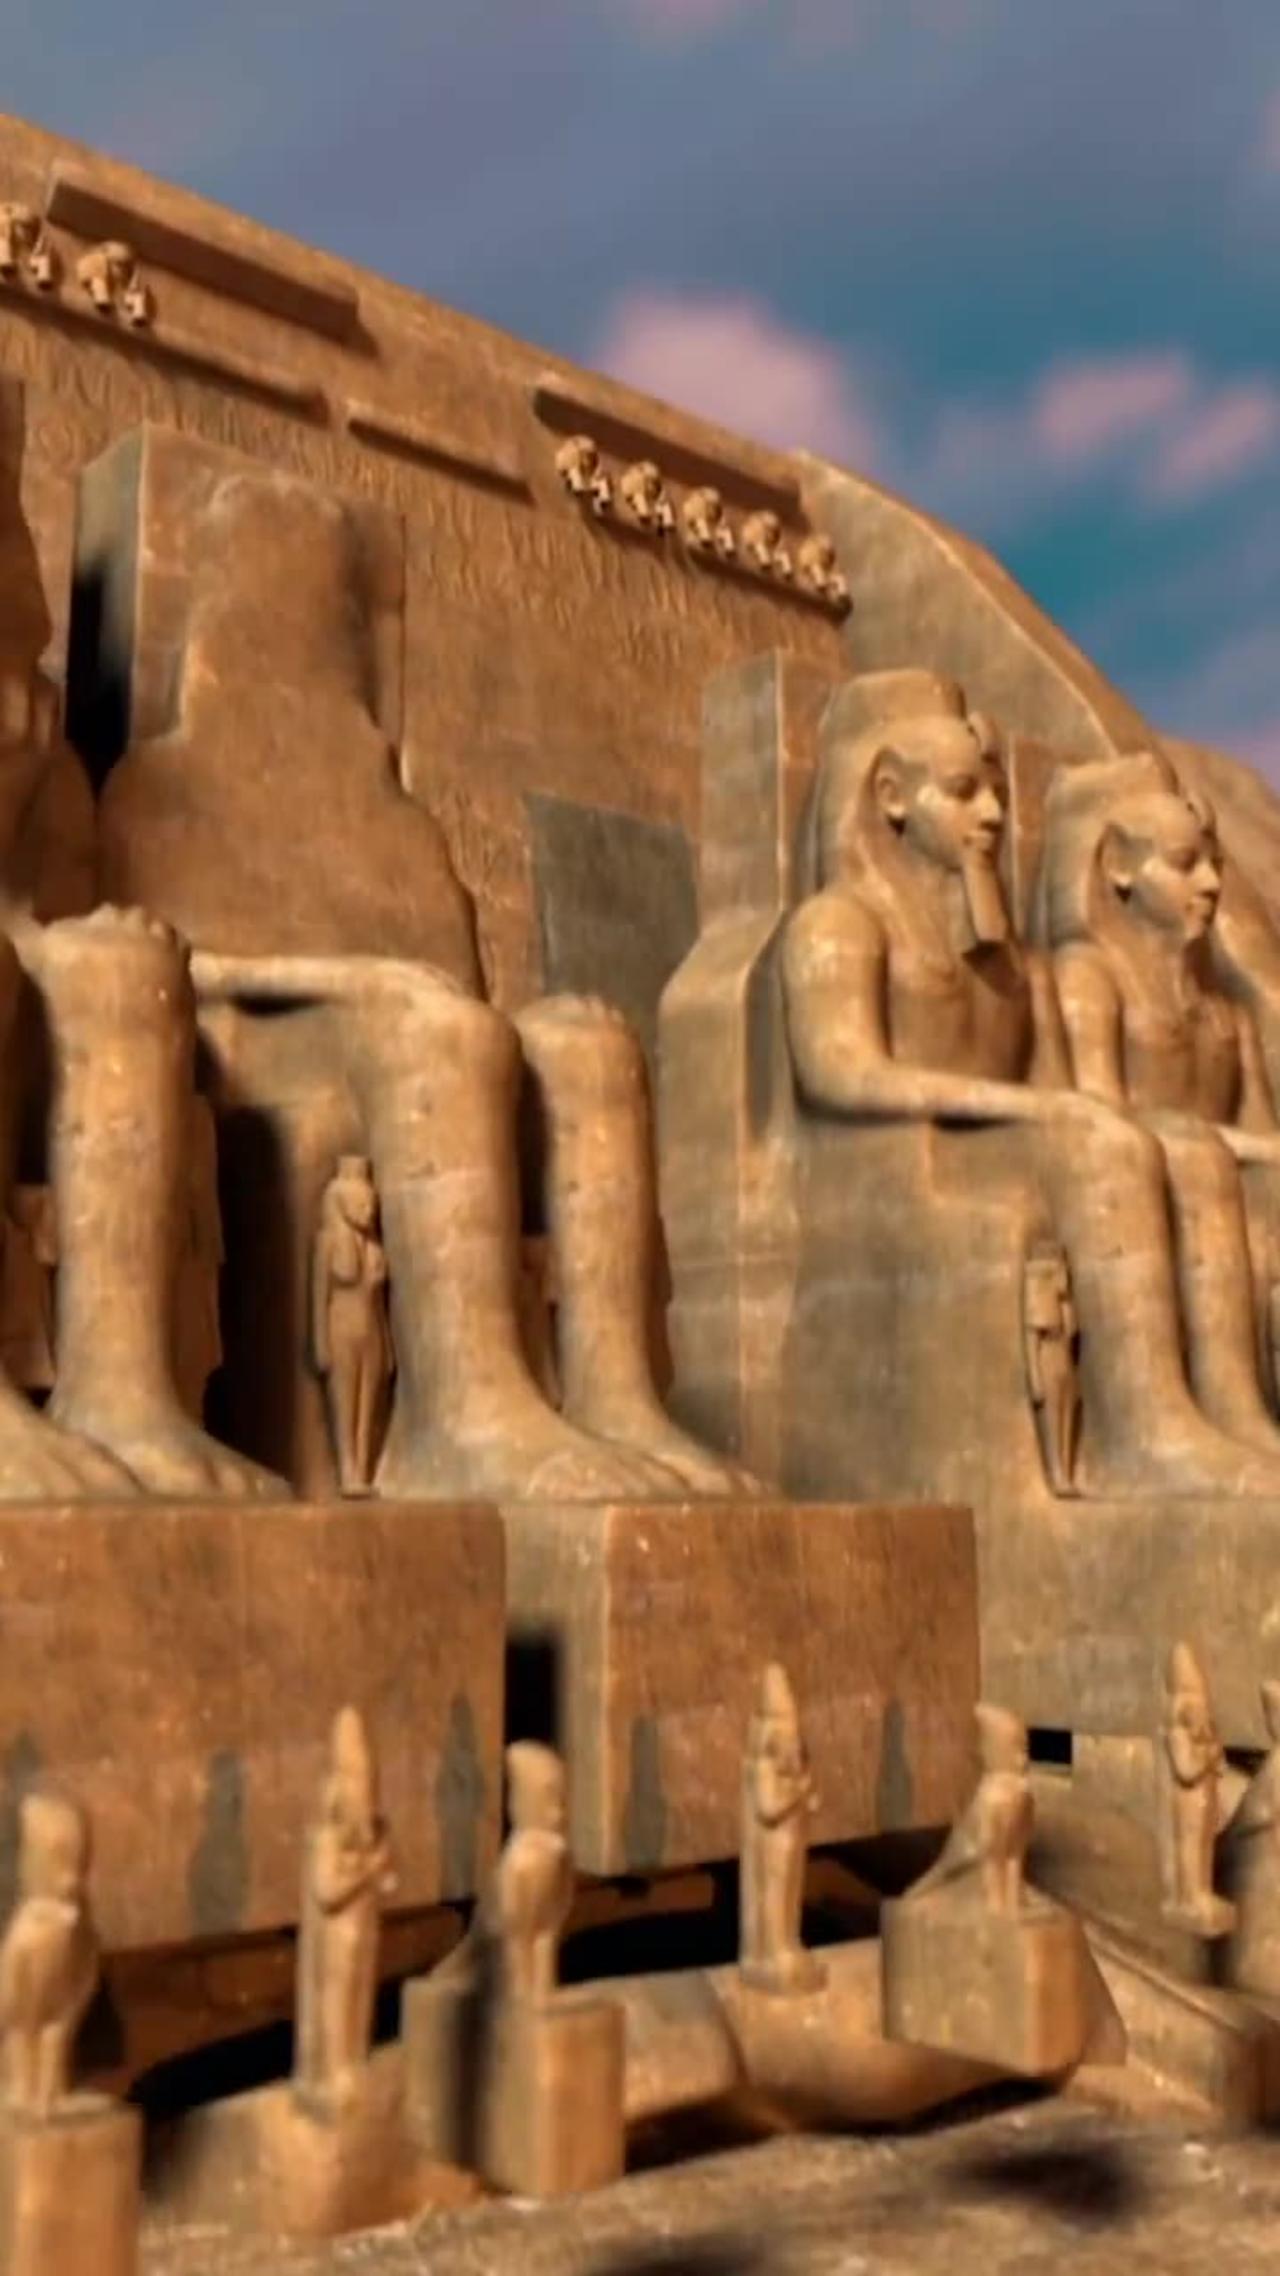 Take a look into Ramesses Il's Rock-cut Temple~ the largest facade of any rock-cut temple in Egypt